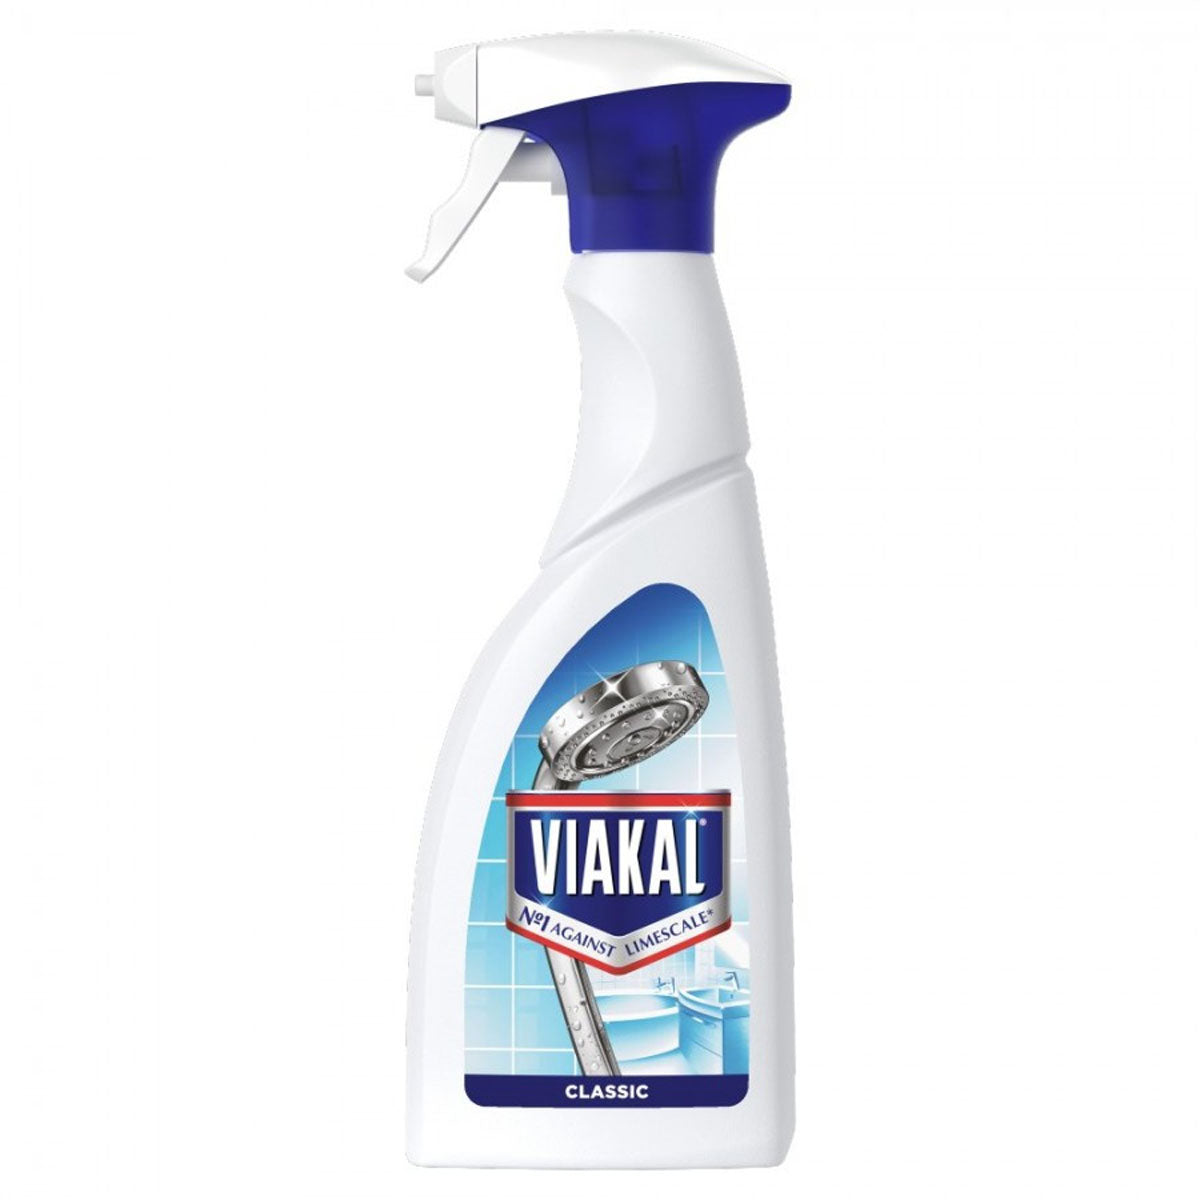 Viakal - Classic Limescale Remover Spray - 500ml - Continental Food Store